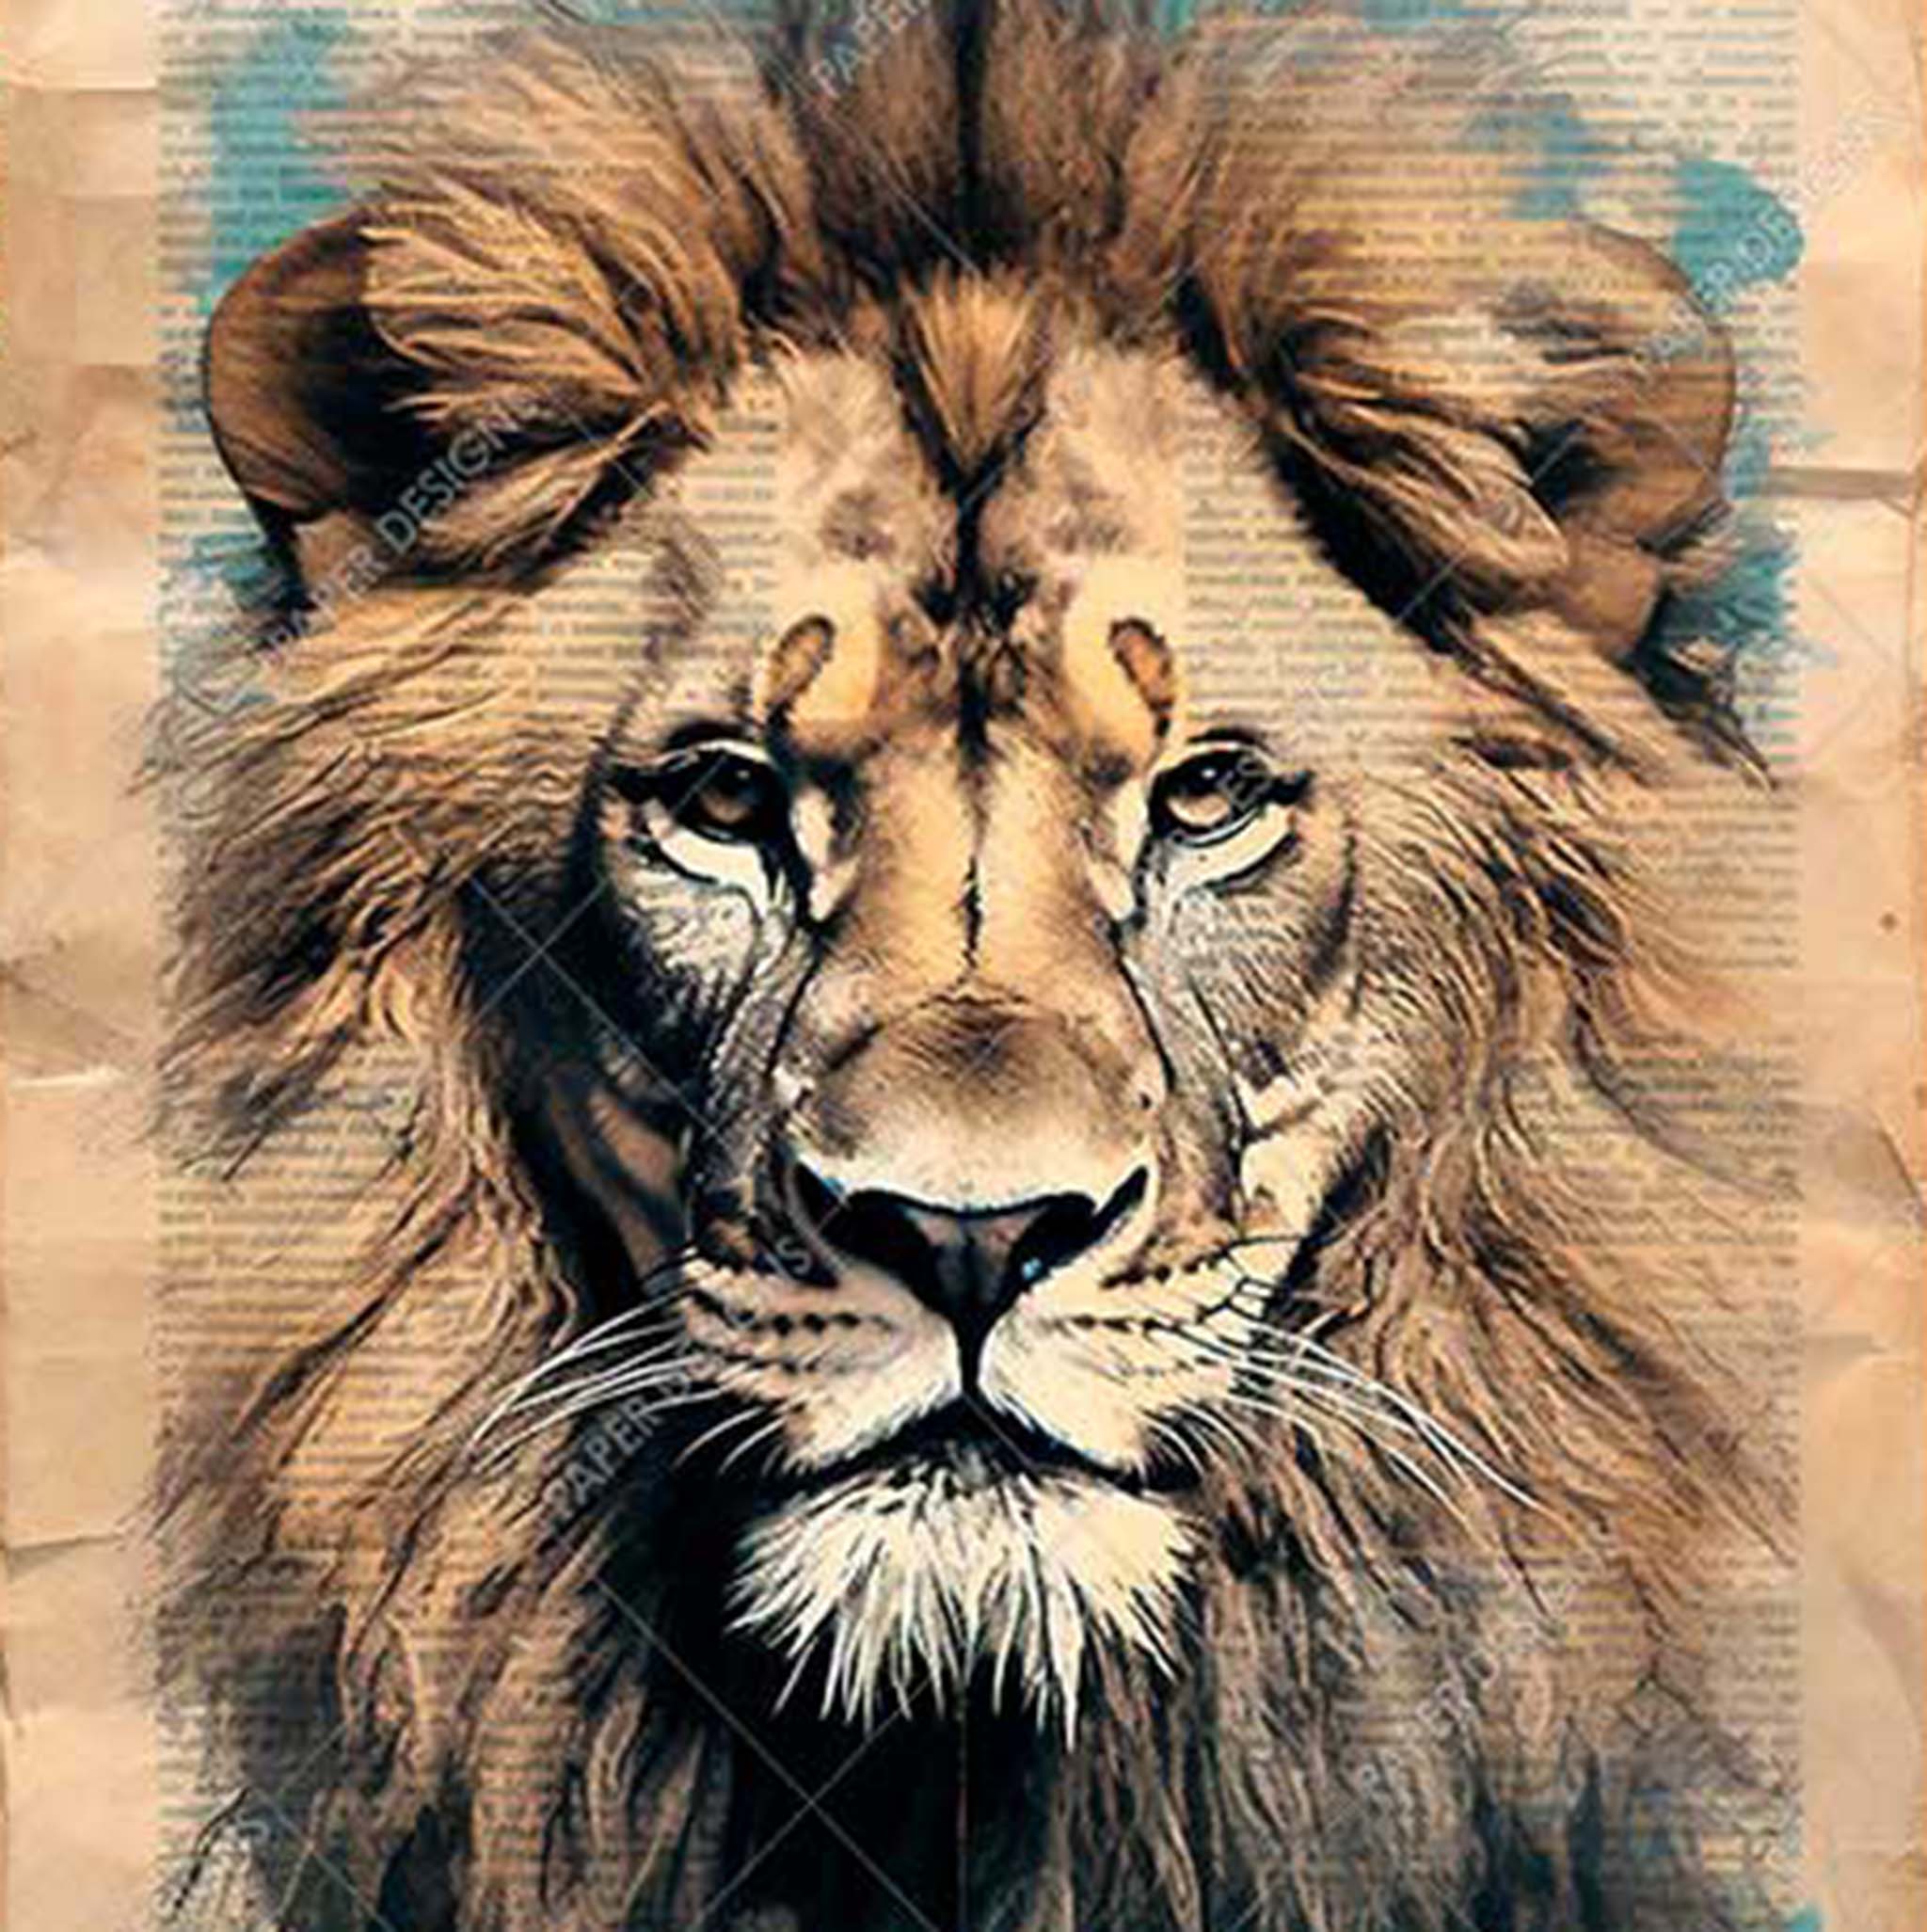 A3 rice paper design that features a vintage sepia tone background and a majestic lion.